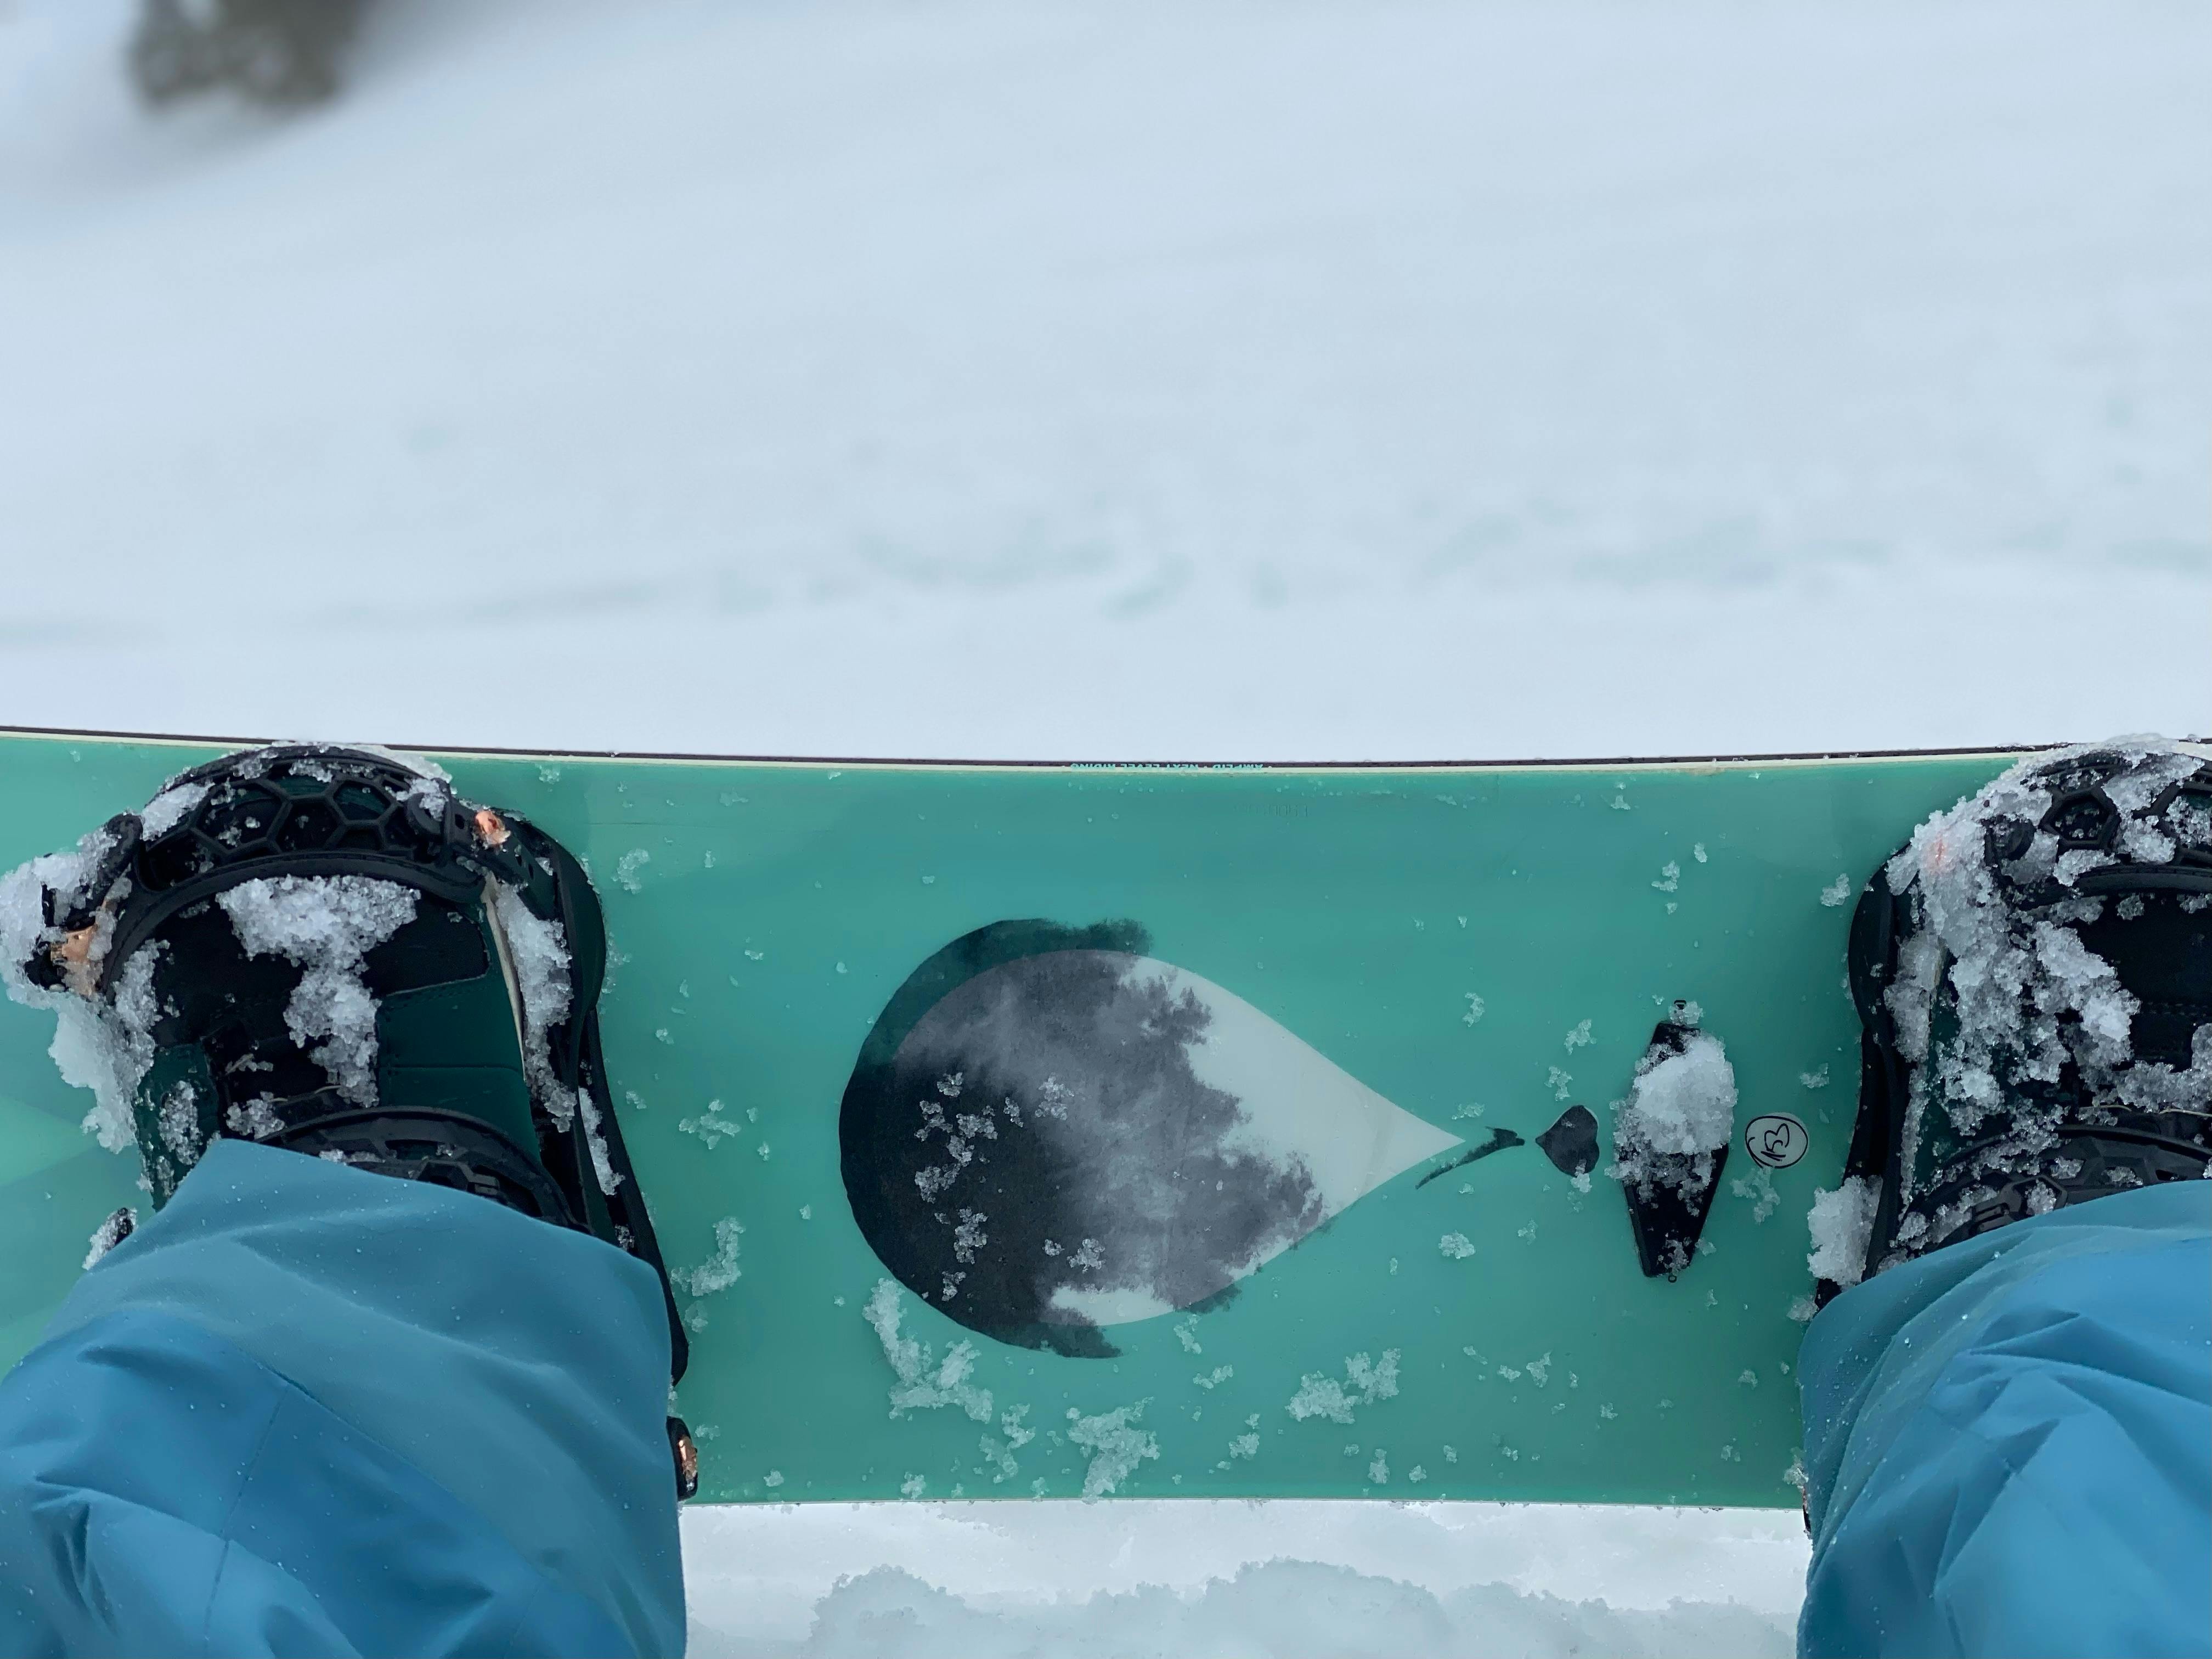 Top down view of a blue snowboard with black bindings. The bottom of the snowboarders pants are also blue and there is snow on the snowboard and underneath the snowboard.